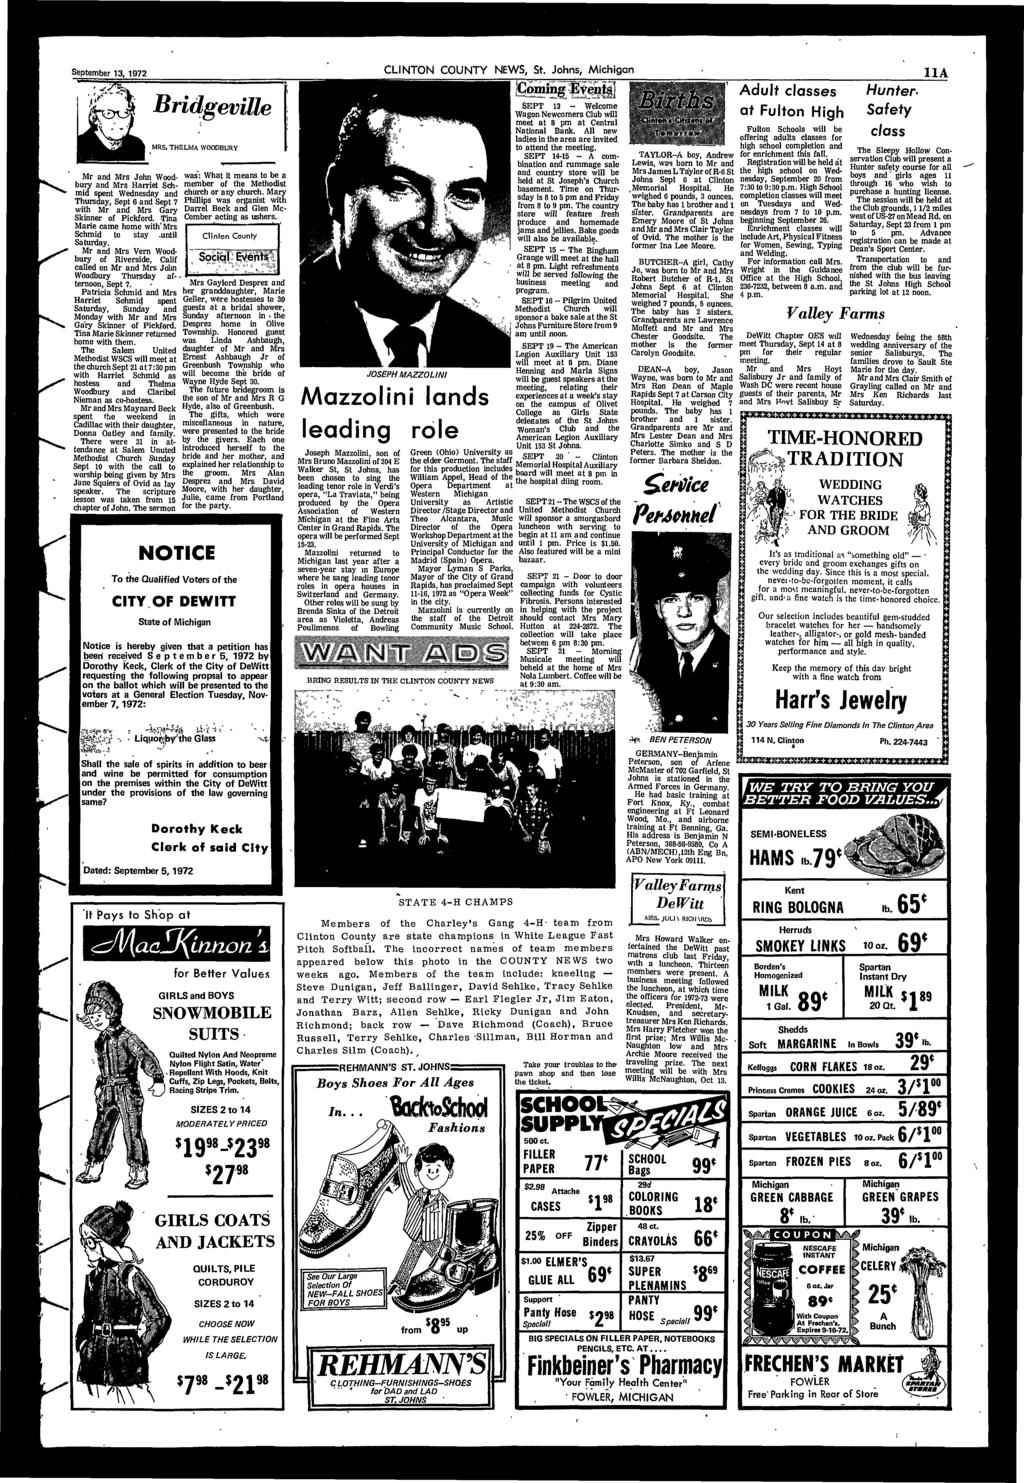 September 13, 1972 CLINTON COUNTY NEWS, St, Johns, Michigan A Mr and Mrs John Woodbury and Mrs arriet Schmid spent Wednesday and Thursday, Sept 6 and Sept 7 with Mr and Mrs Gary Skinner of Pickford.